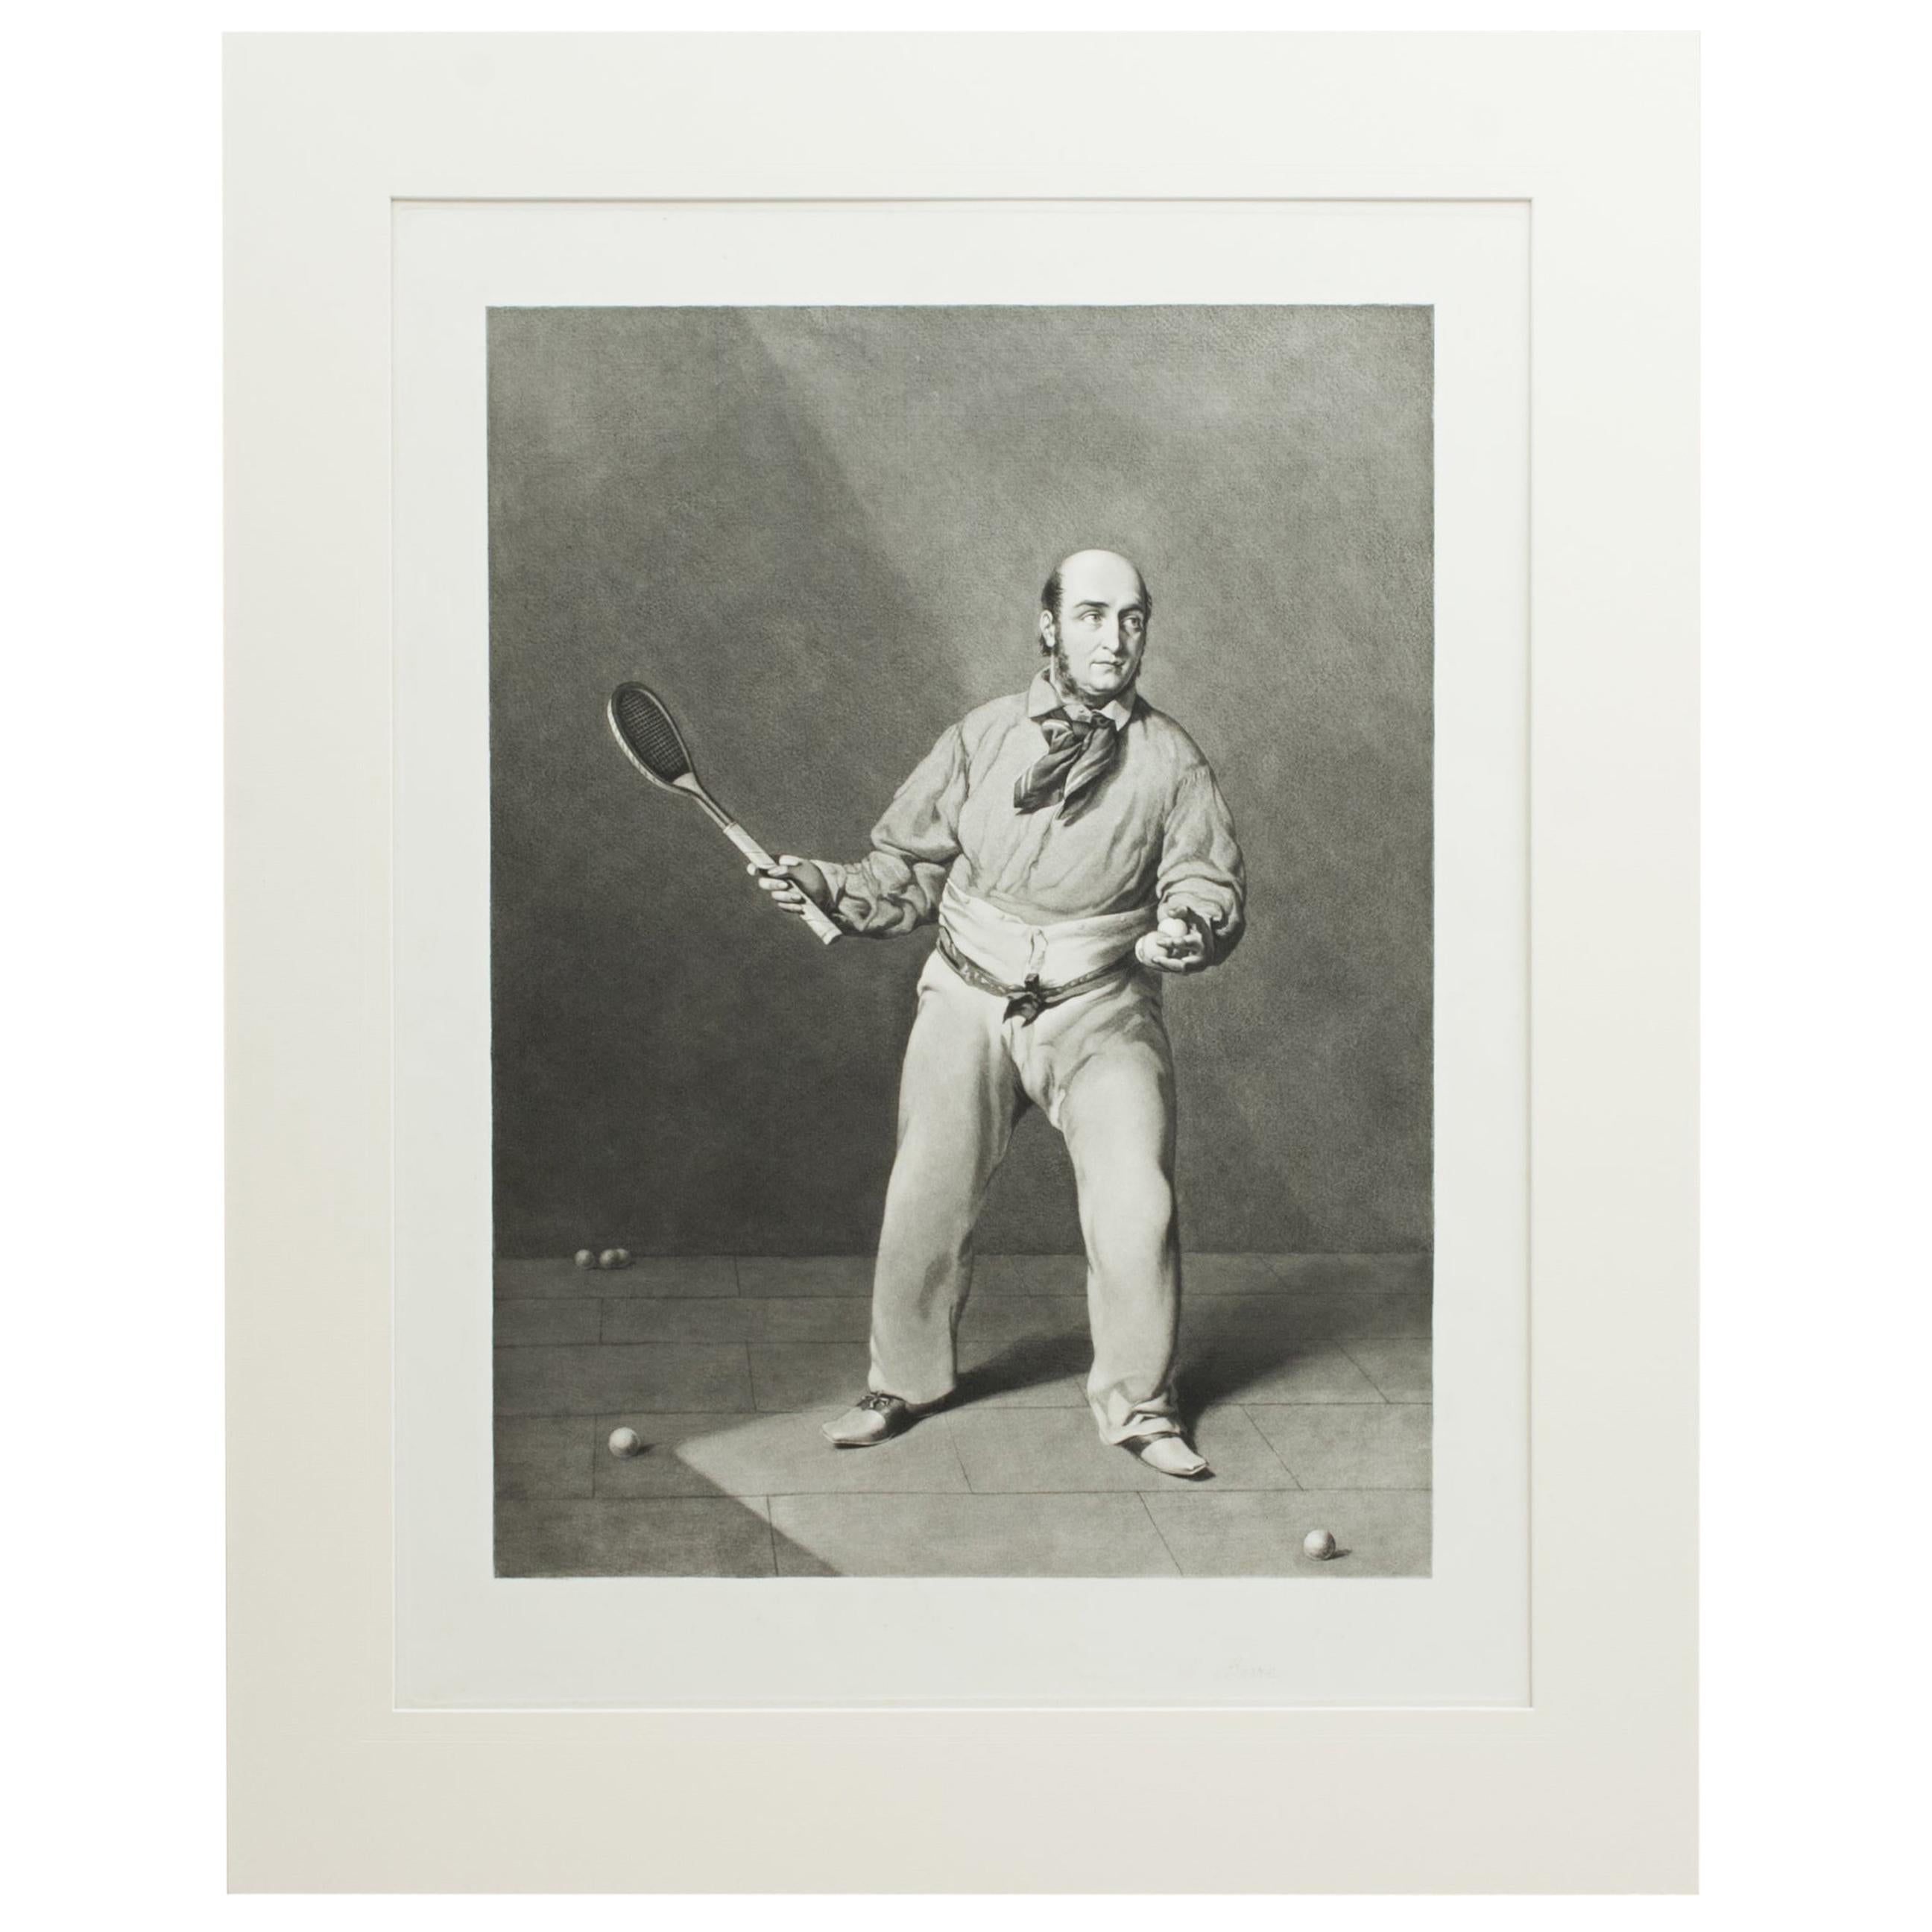 Real Tennis Print, Ed Barre by W. Bromley